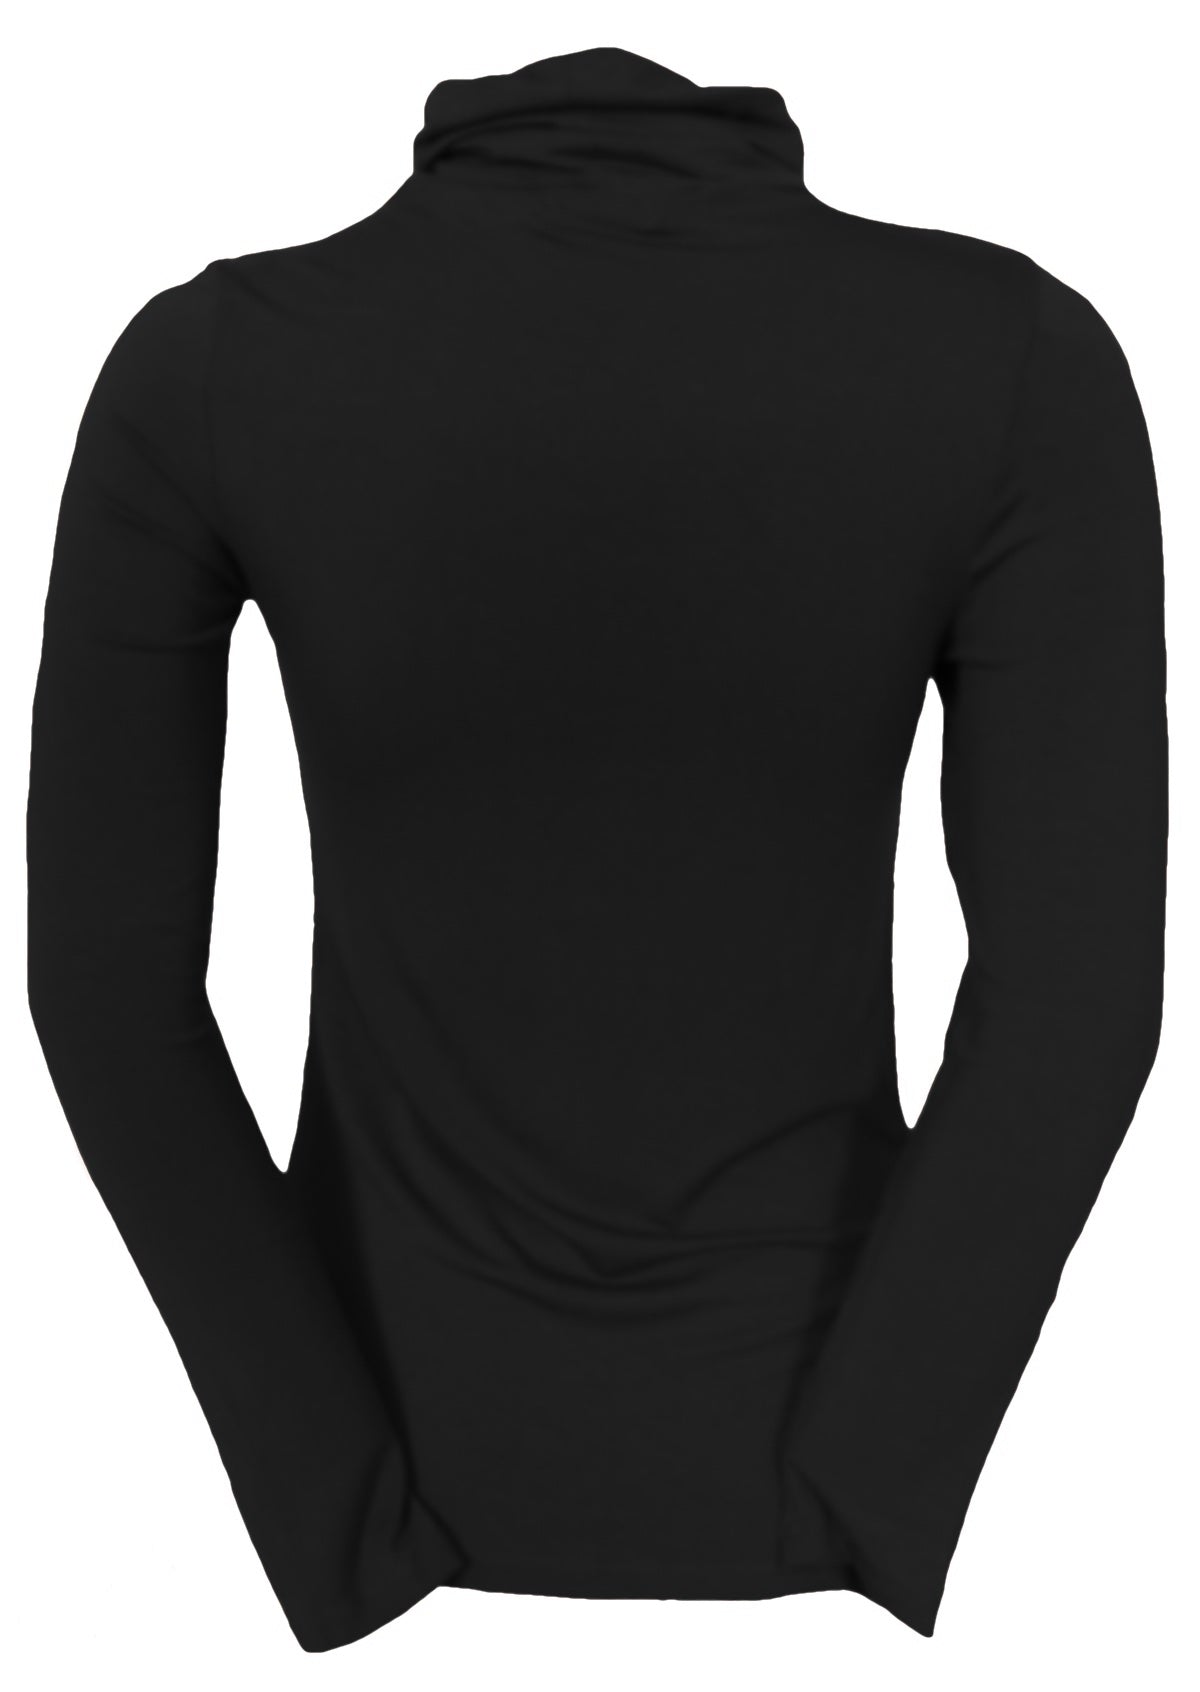 Back view of women's long sleeve turtle neck black top.